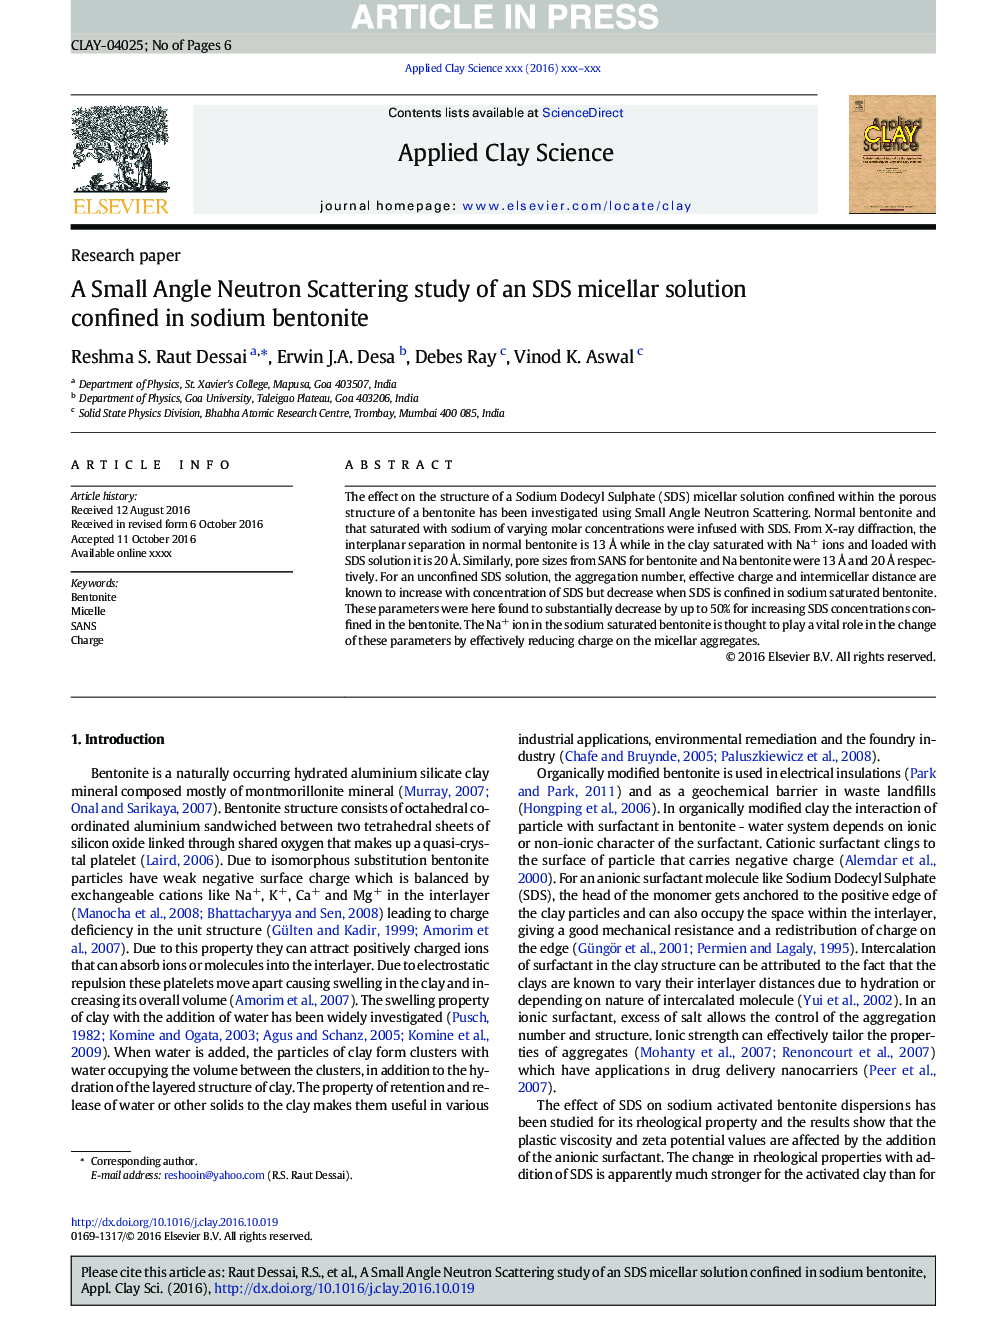 A Small Angle Neutron Scattering study of an SDS micellar solution confined in sodium bentonite